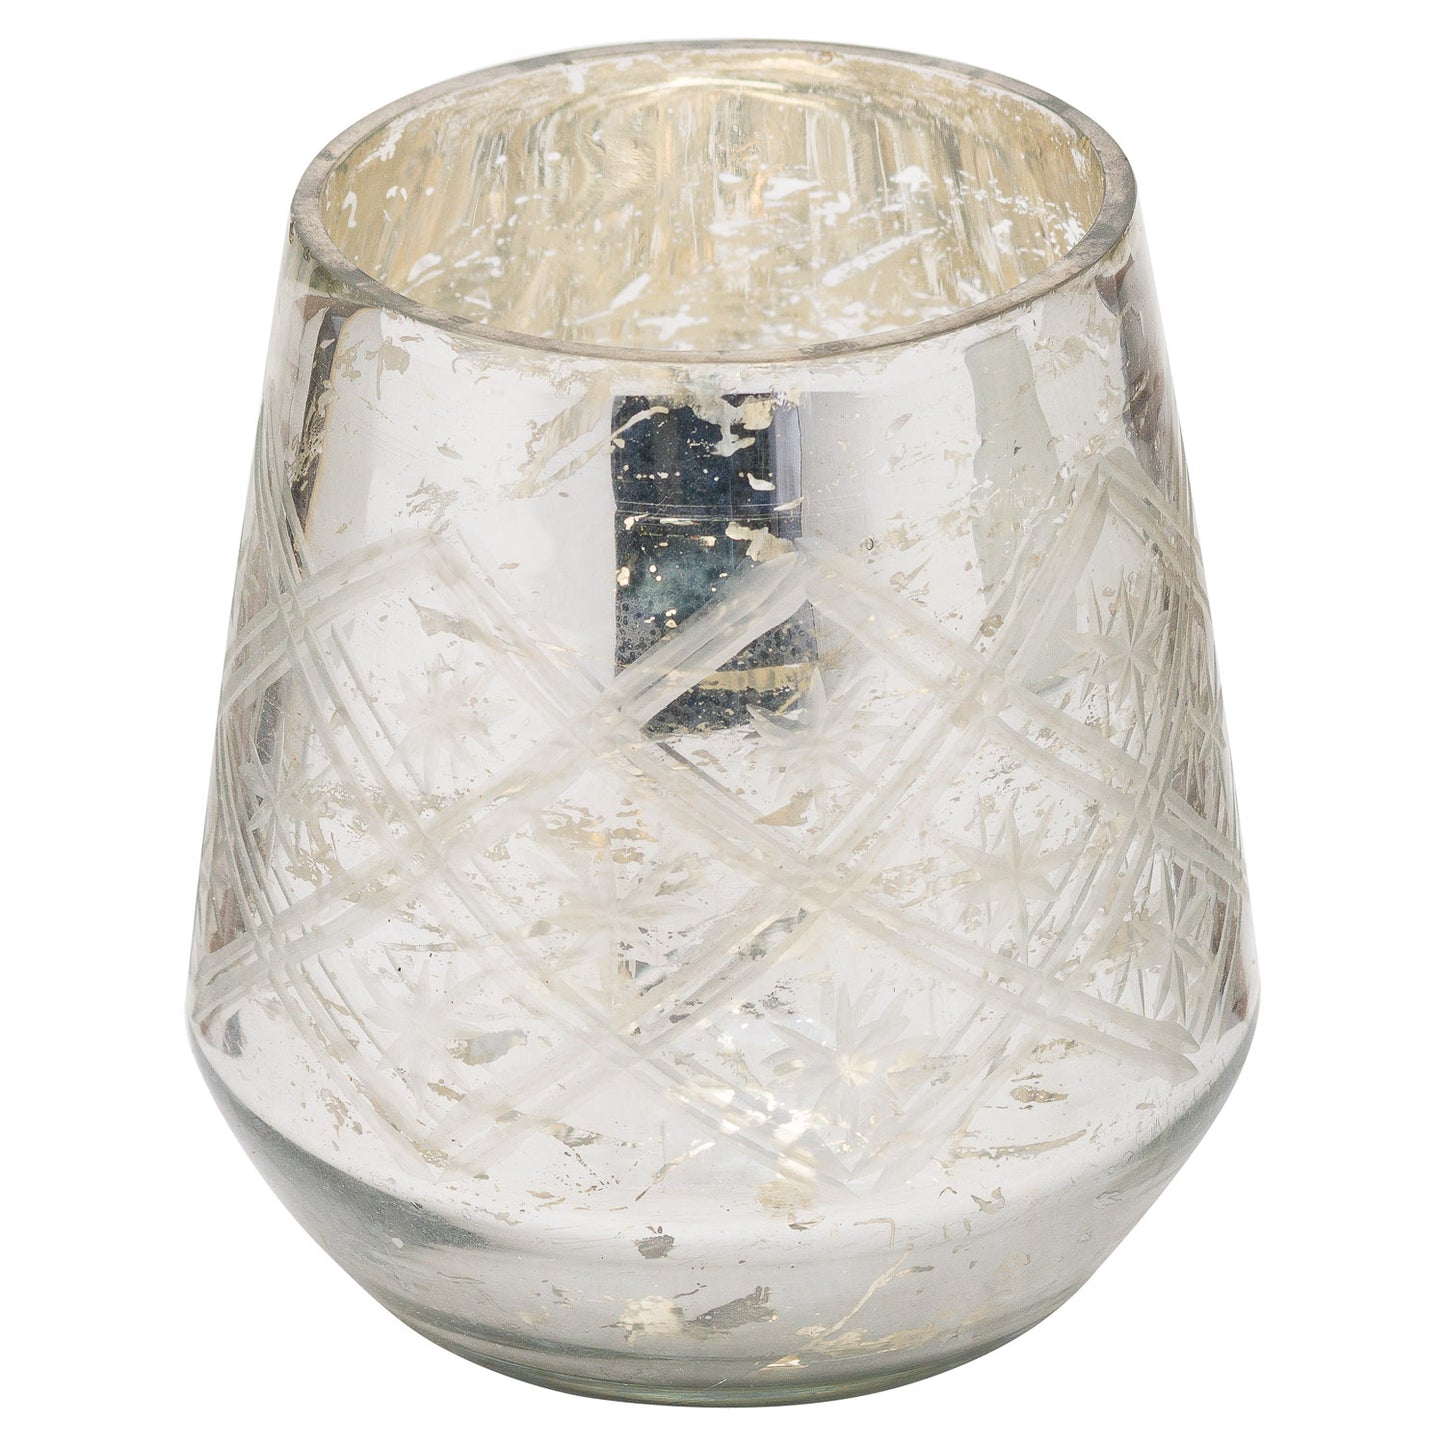 The Noel Collection Silver Foil Effect Tealight Holder